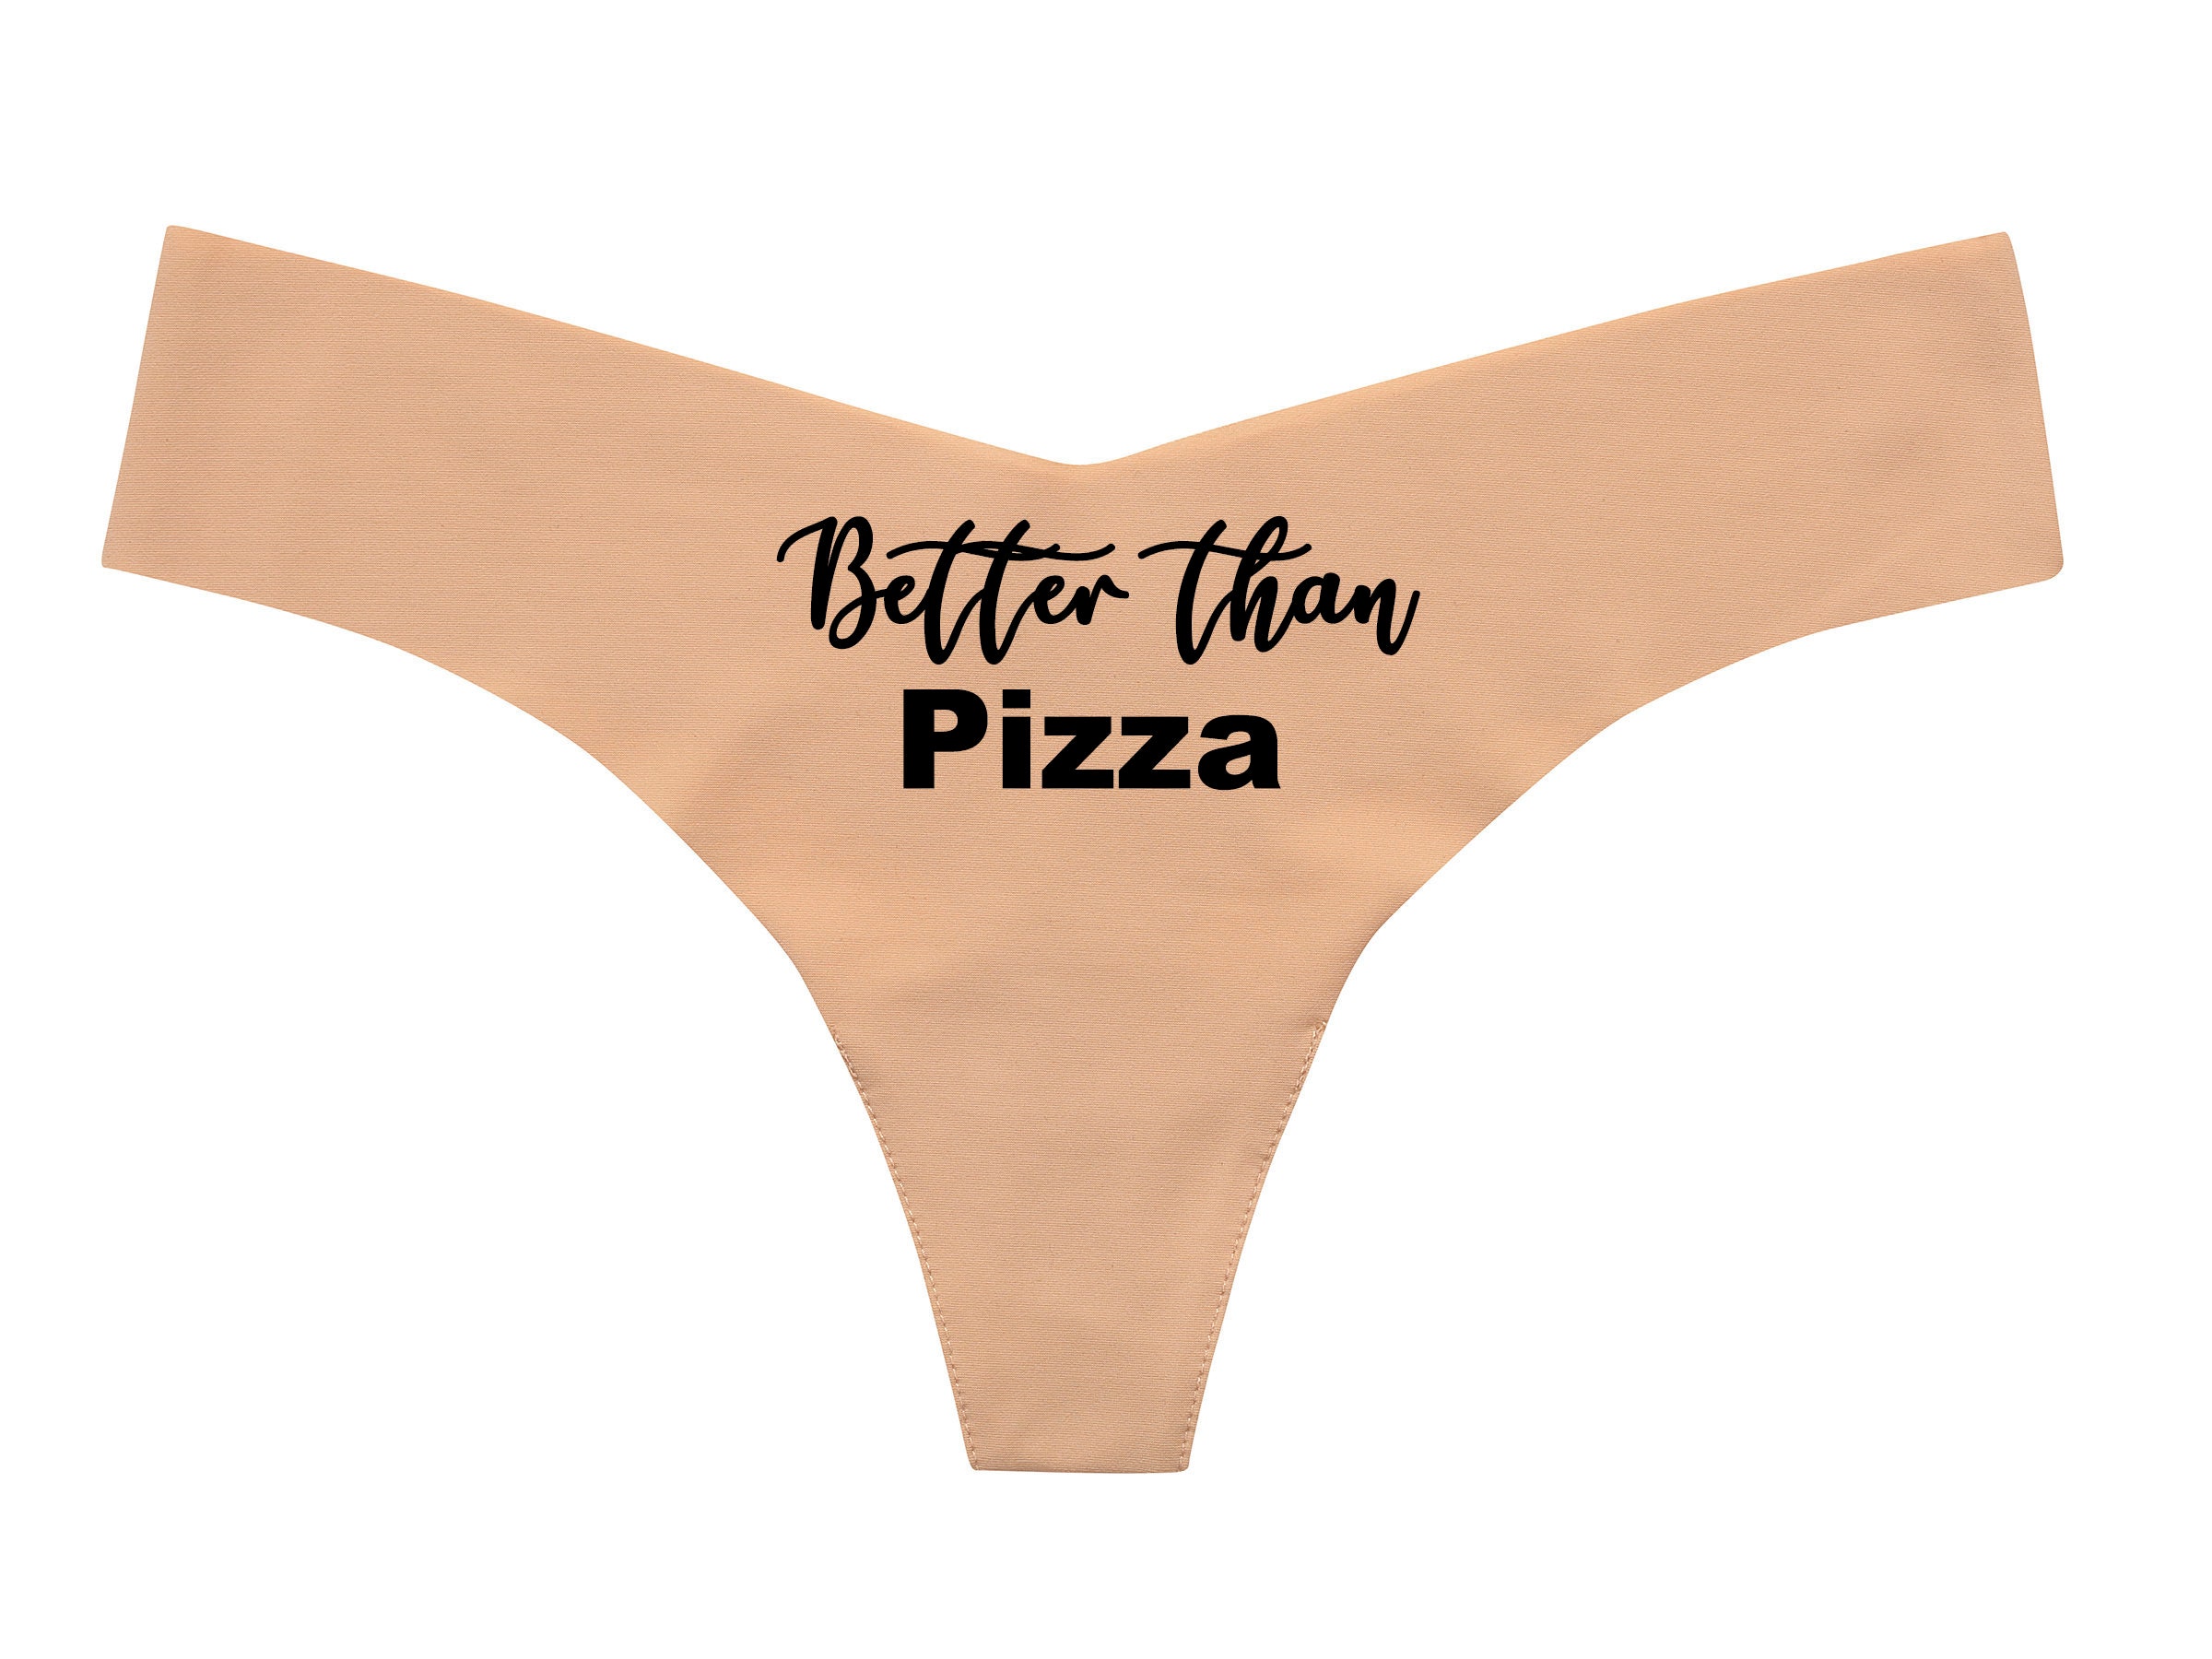 You Had me At Pizza Panties Funny Sexy Slutty Pizza Slut Panties Booty  Bachelorette Party Bridal Gift Panties Booty Womens Underwear